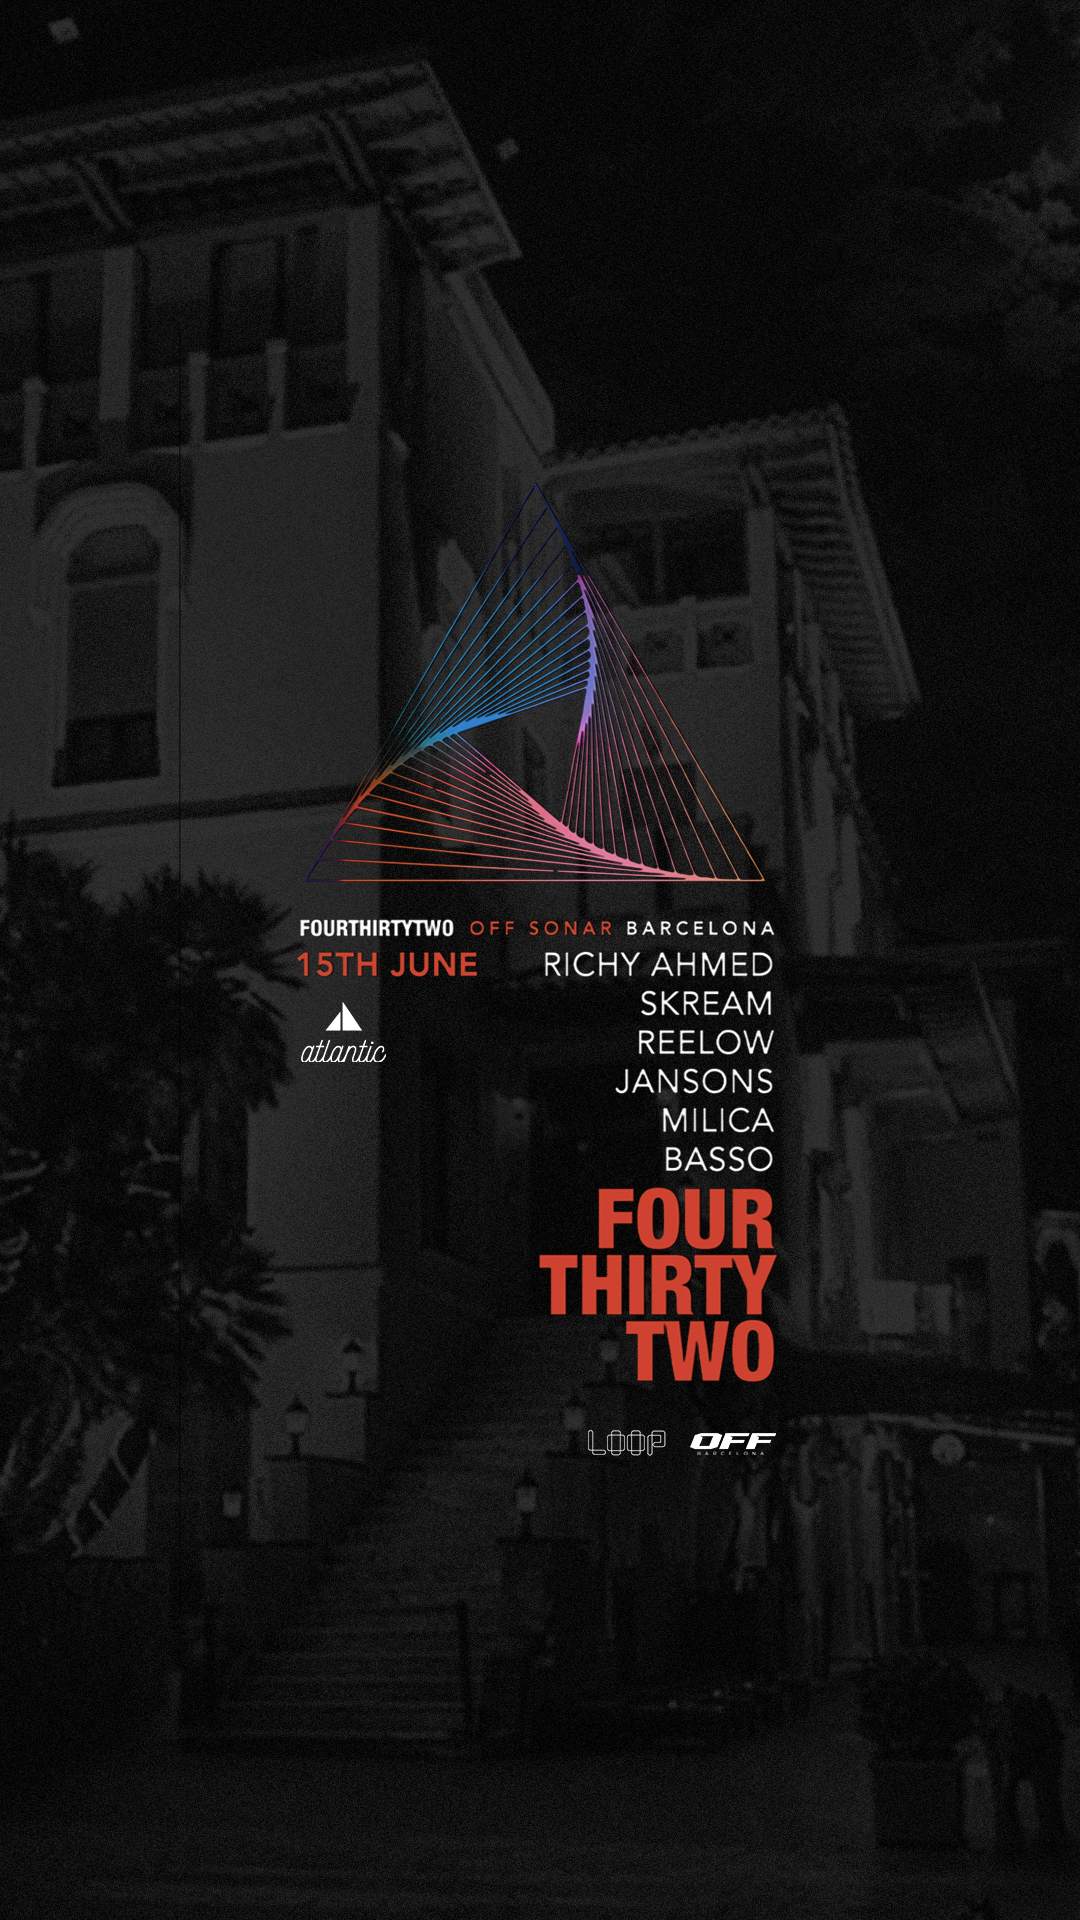 (FREE TICKETS) 432 Four Thirty Two with Richy Ahmed + Skream  - Página frontal